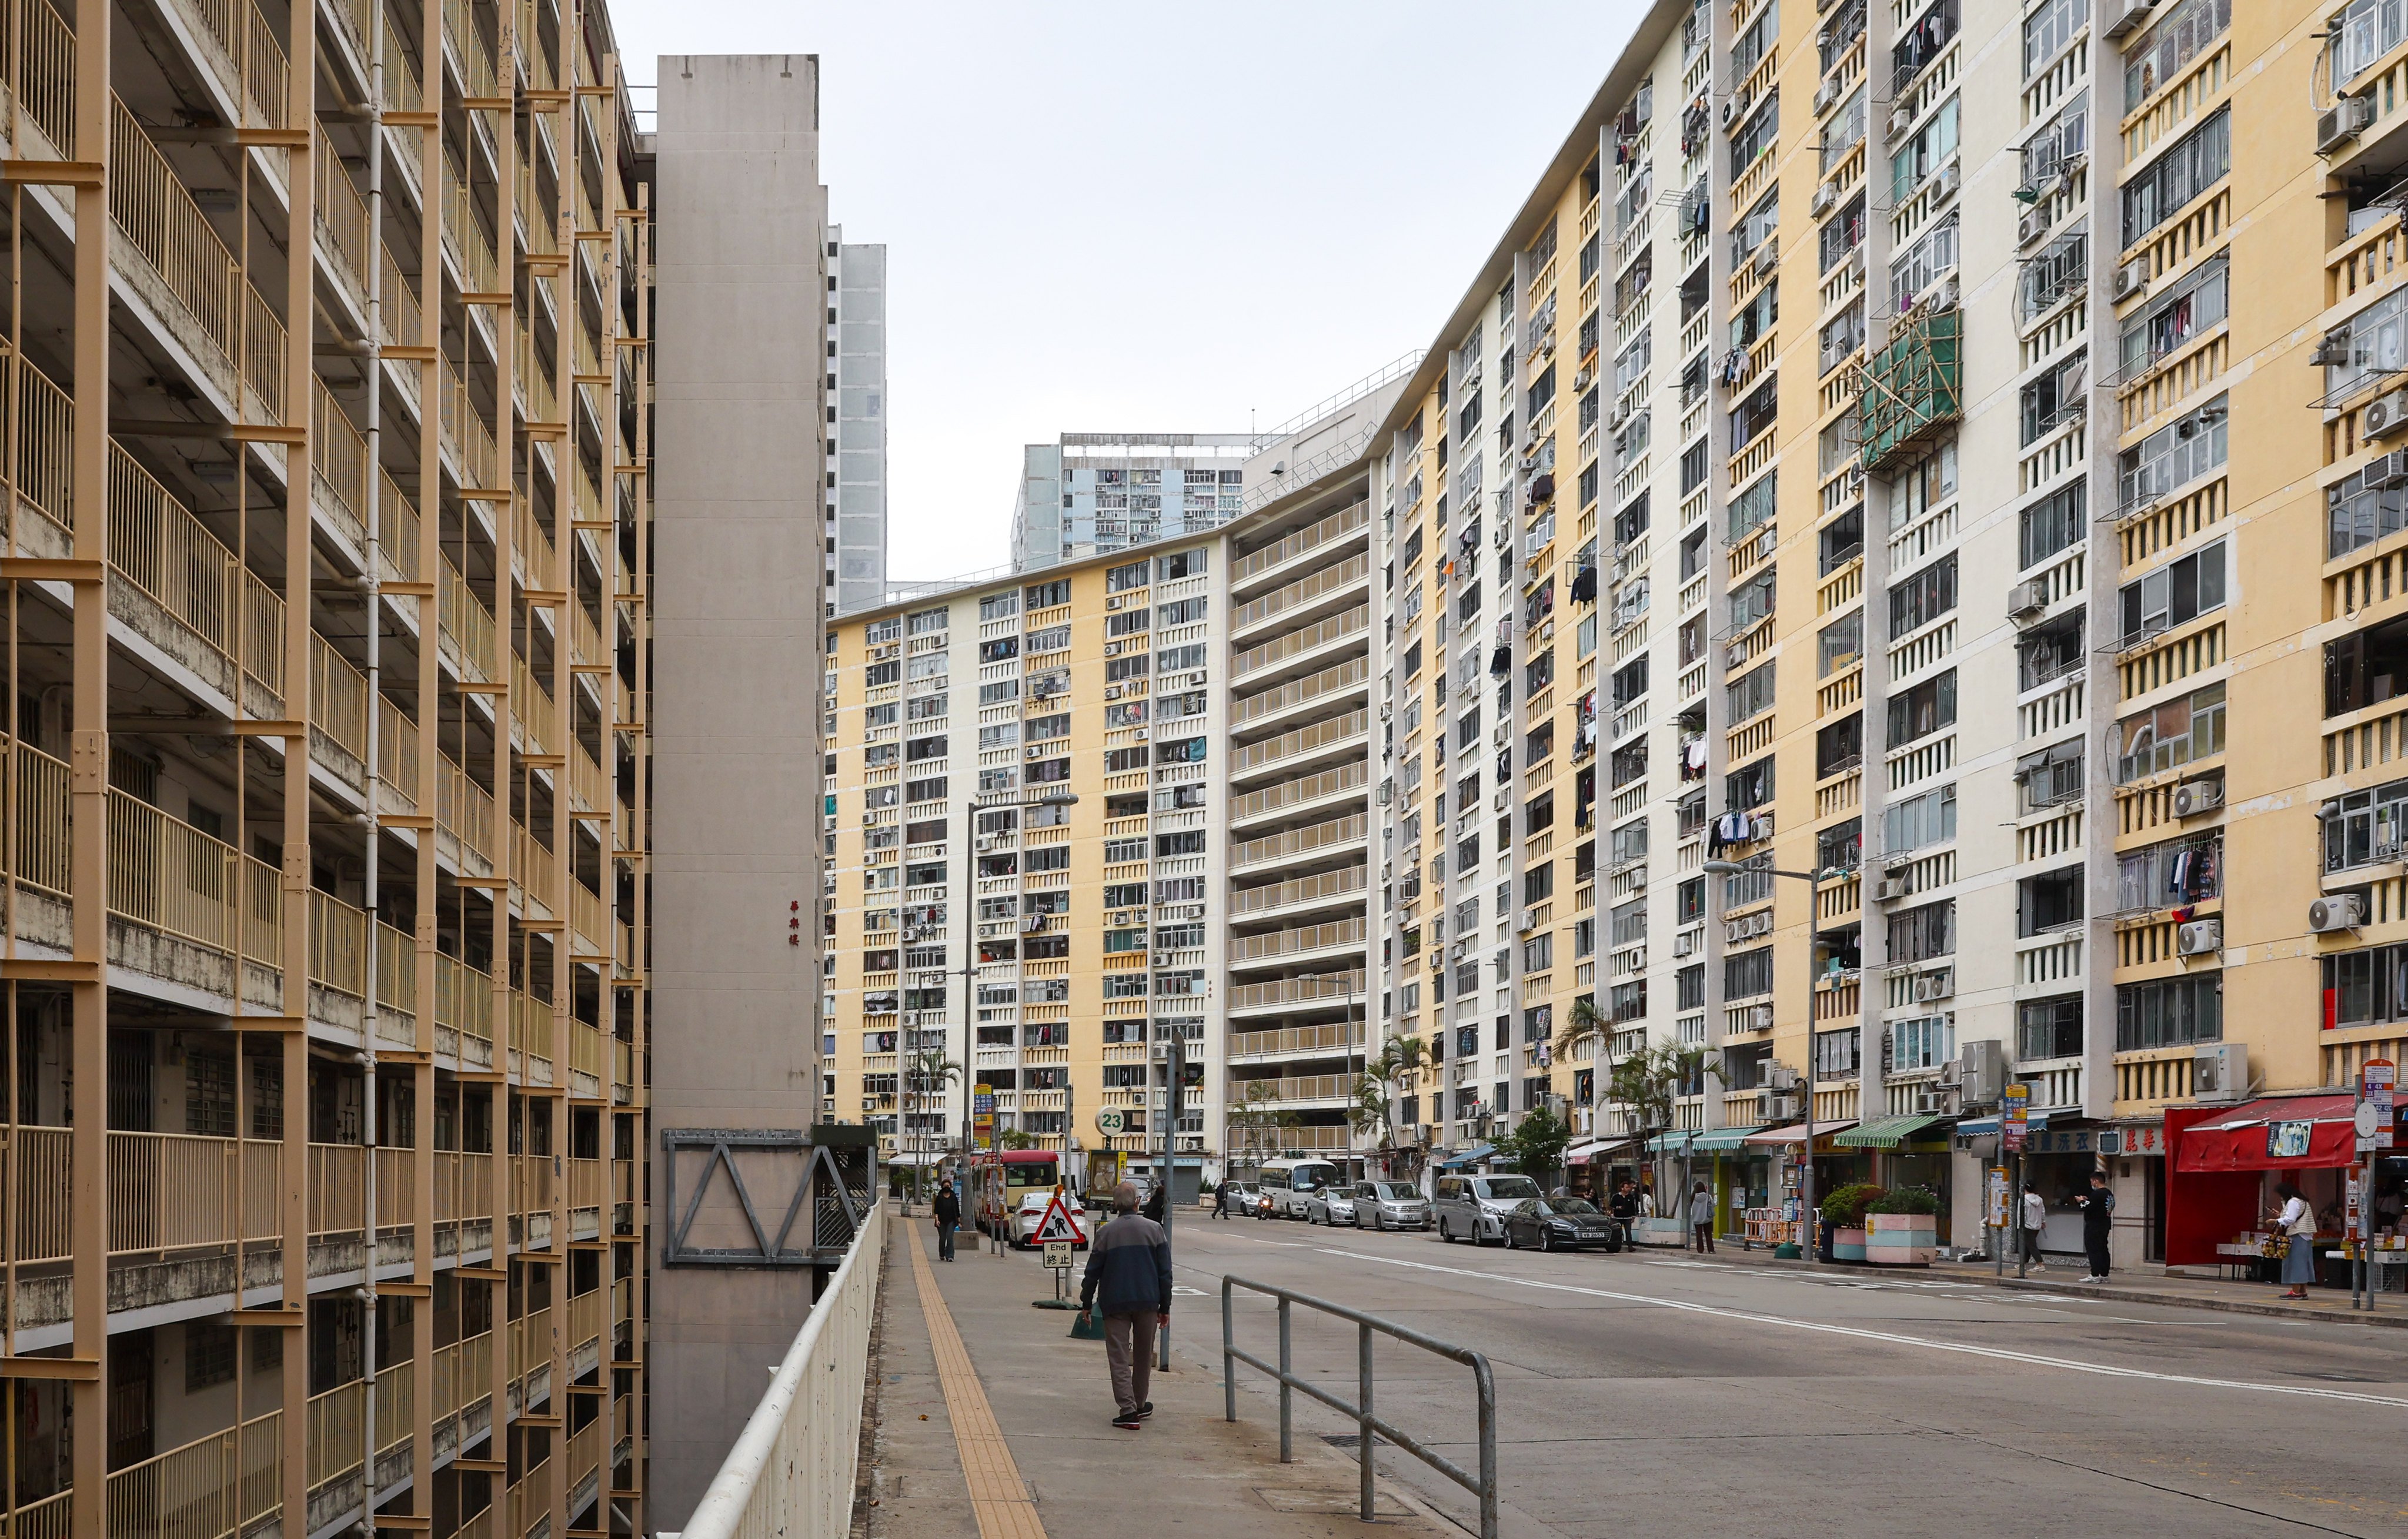 The Wah Fu Estate, where the first 900 households will move before July 2027 as the Housing Authority prepares to redevelop the area. Photo: Edmond So